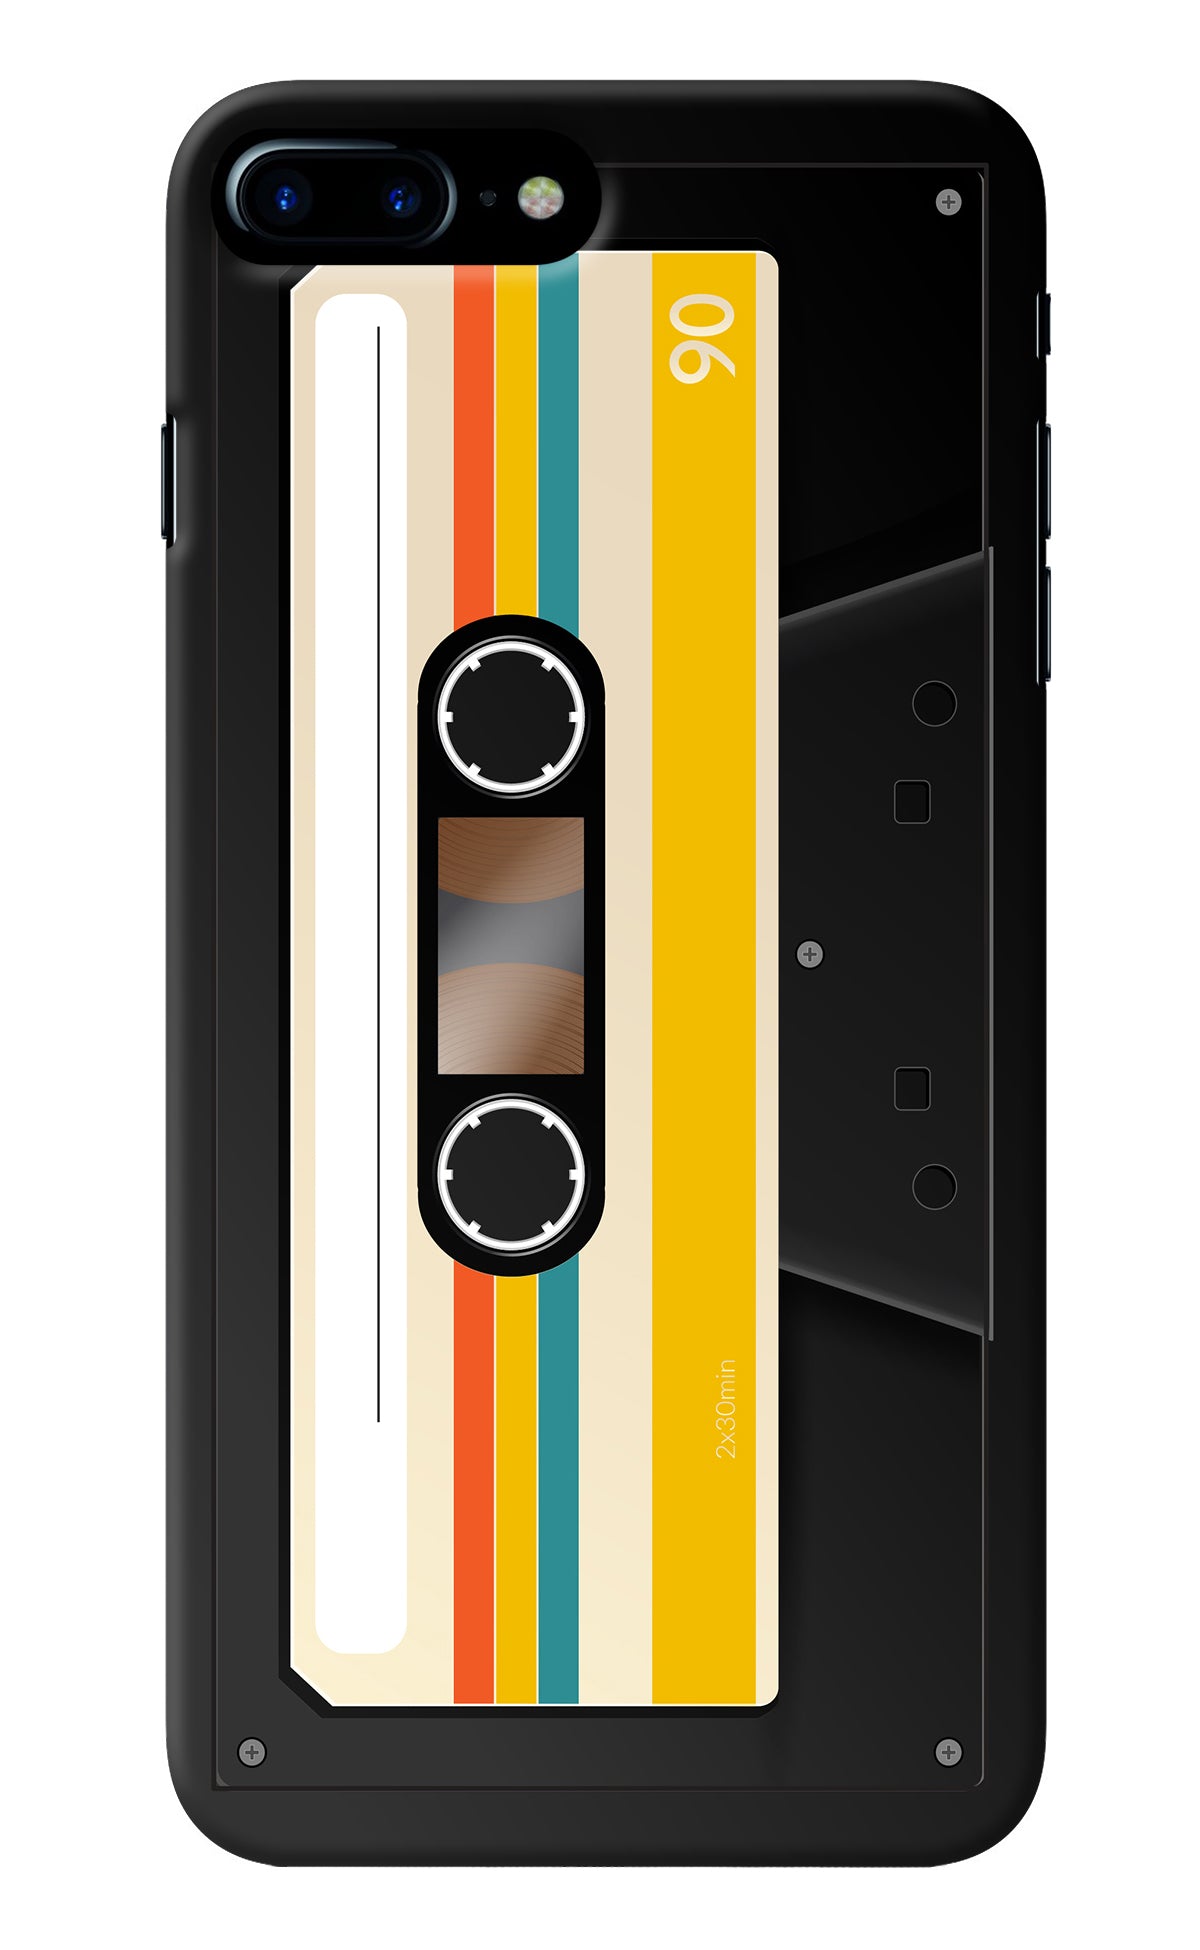 Tape Cassette iPhone 8 Plus Back Cover